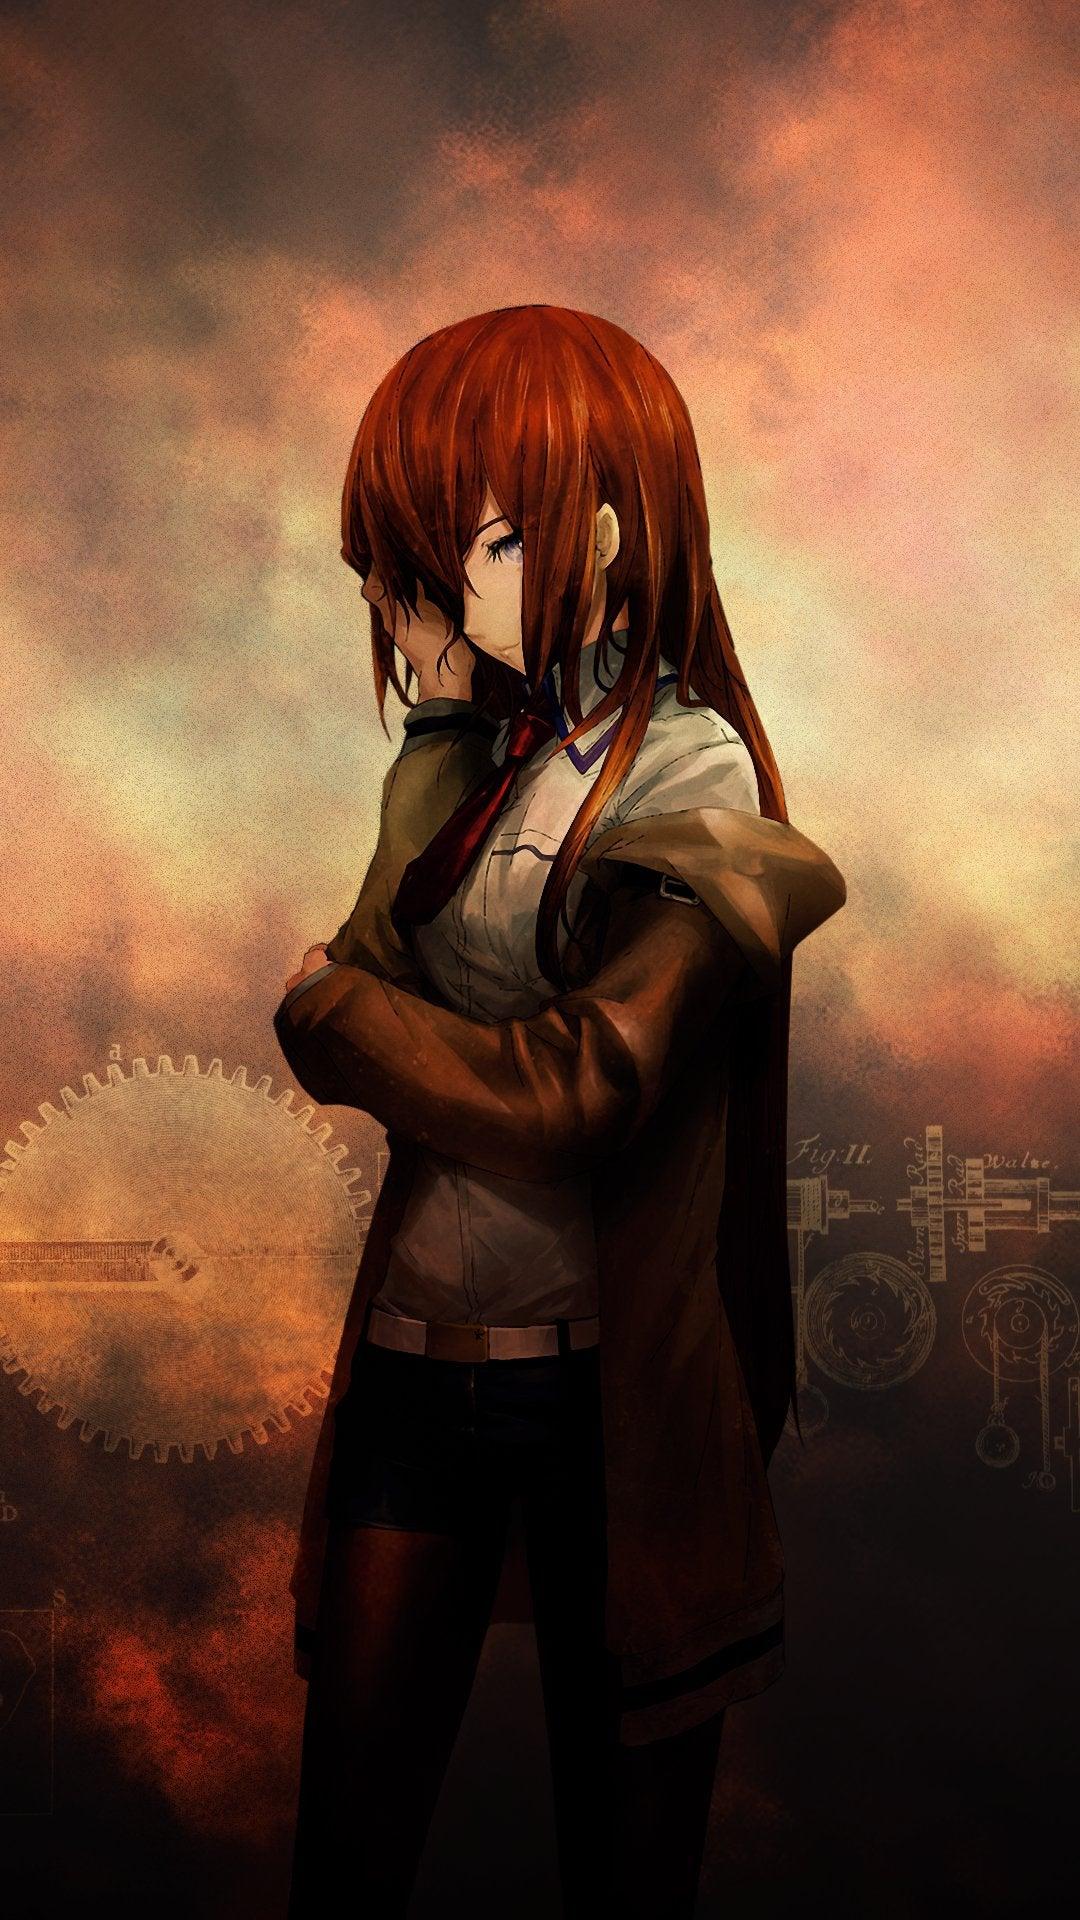 A Collection of my Steins;Gate Phone Wallpaper. Hope you find